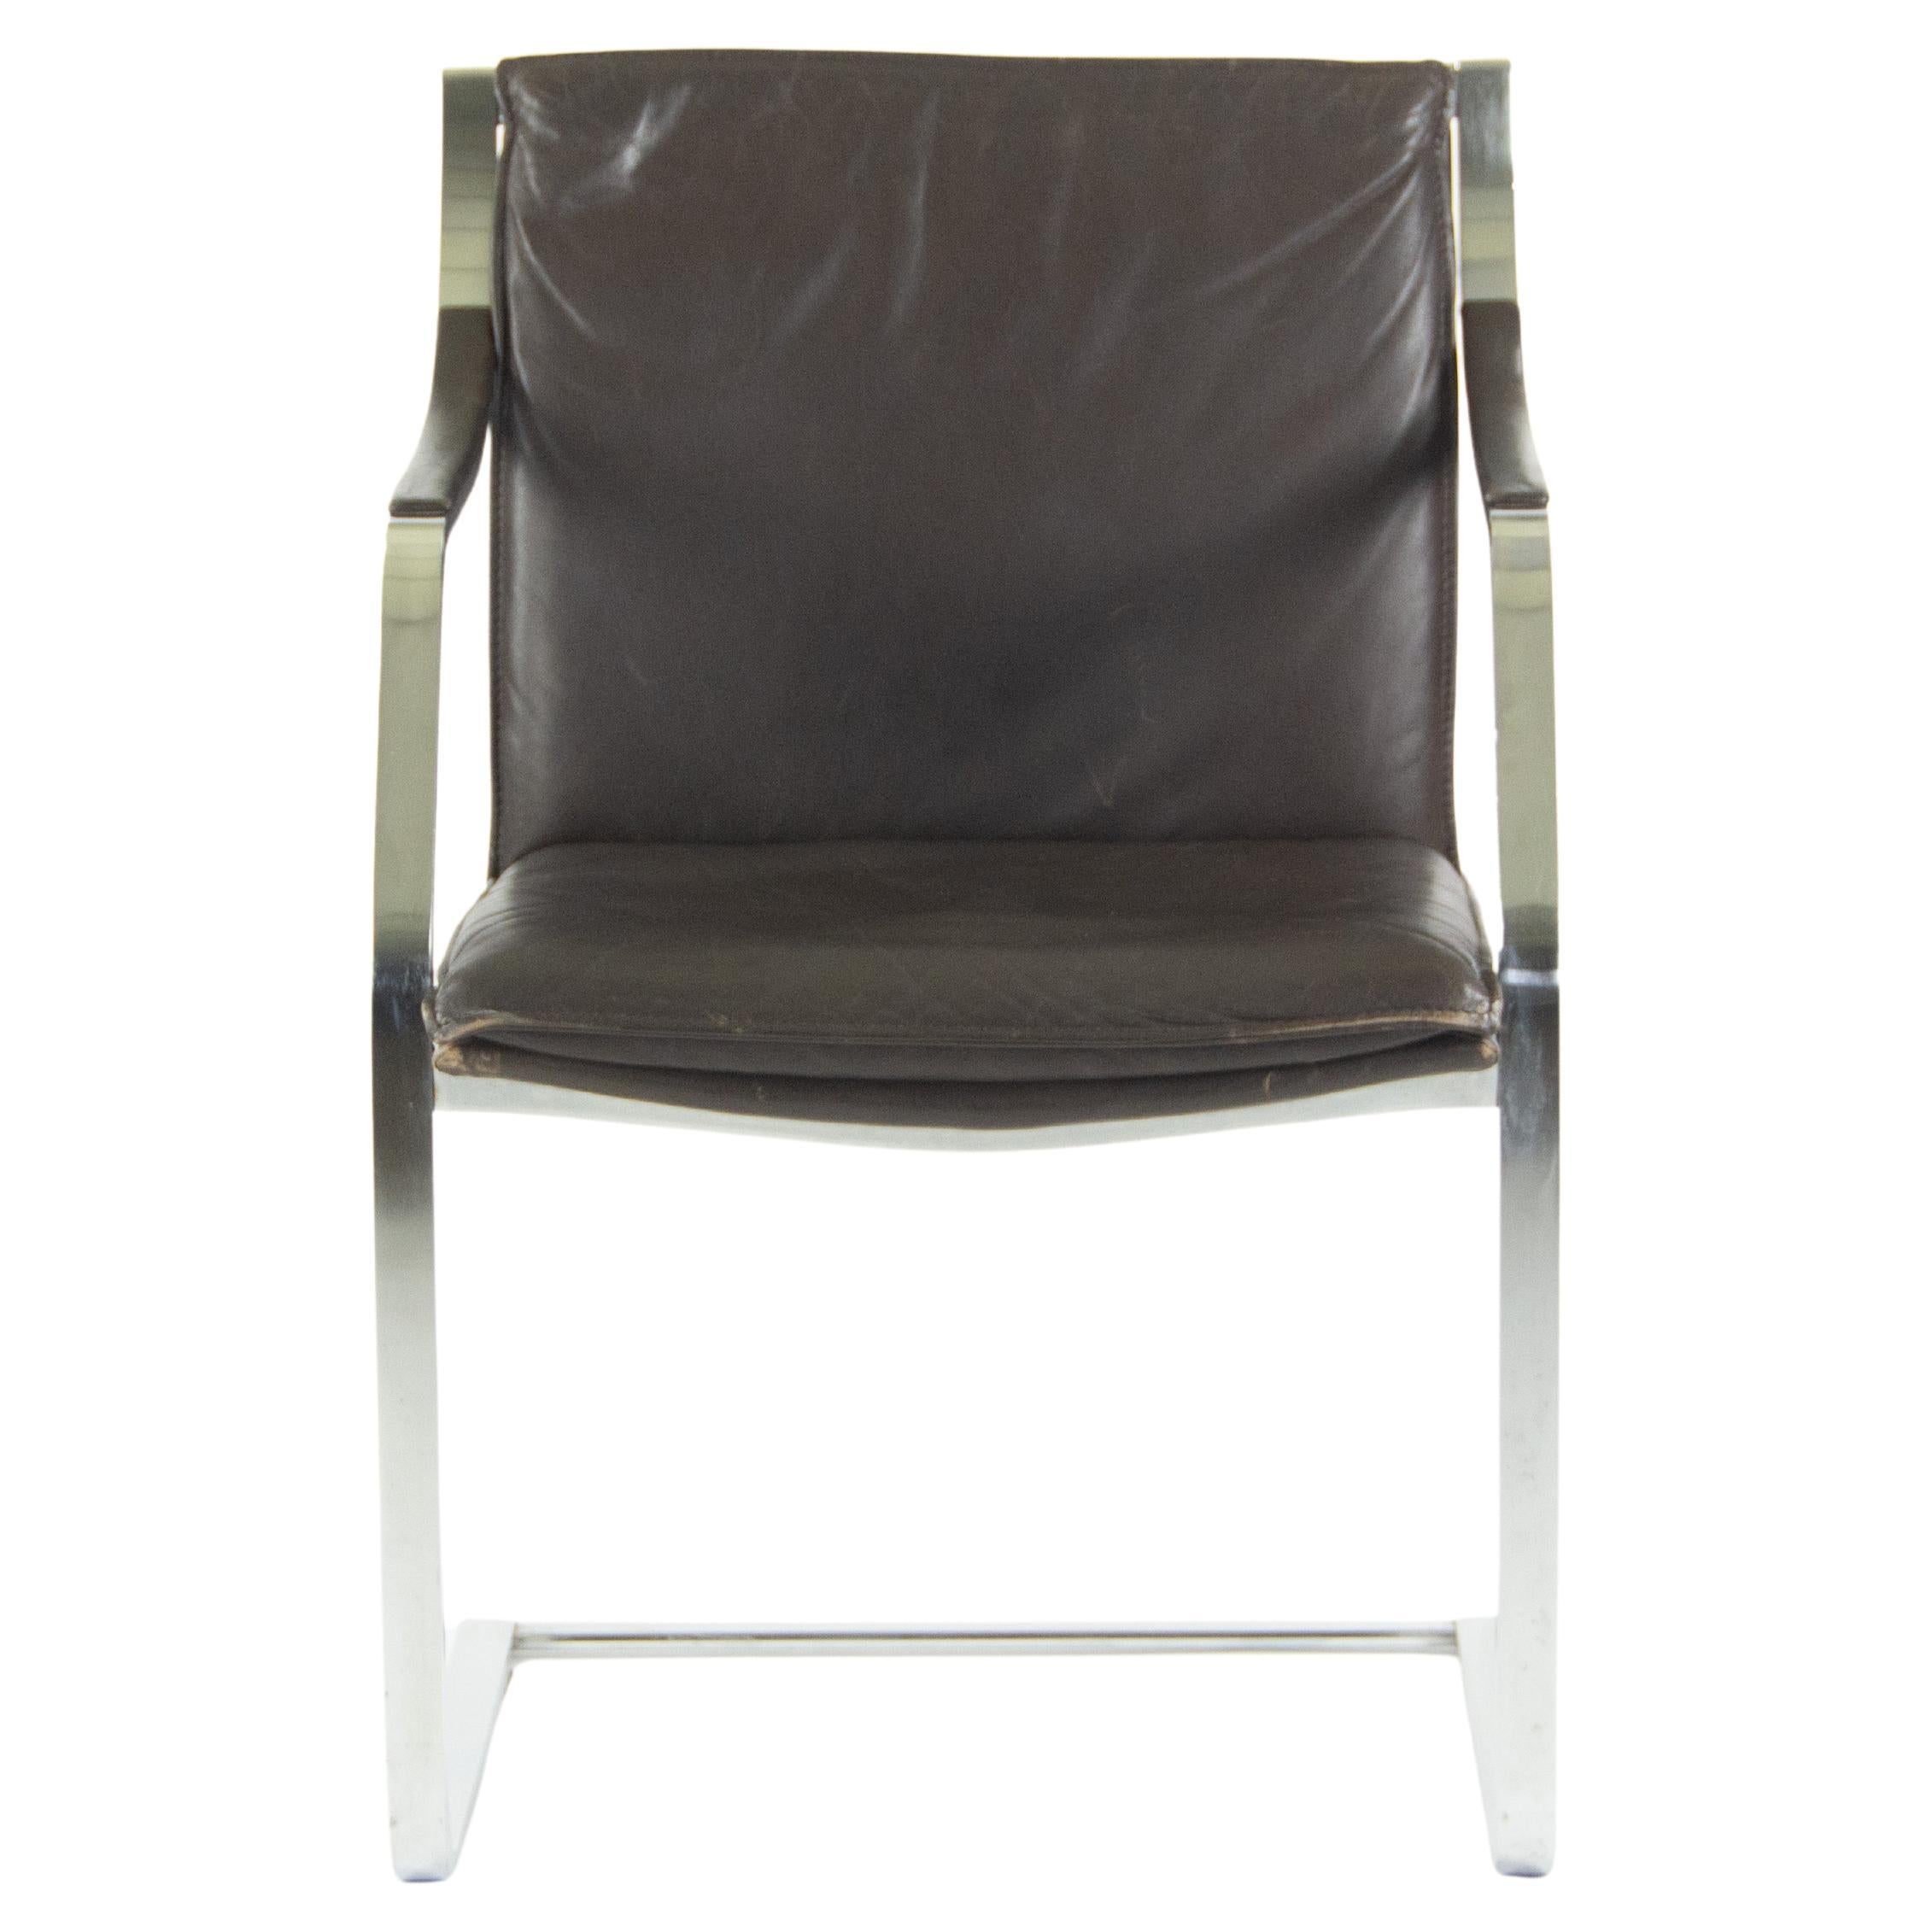 Rudolf B. Glatzel Vintage Walter Knoll Art Collection Leather & Stainless Chair For Sale